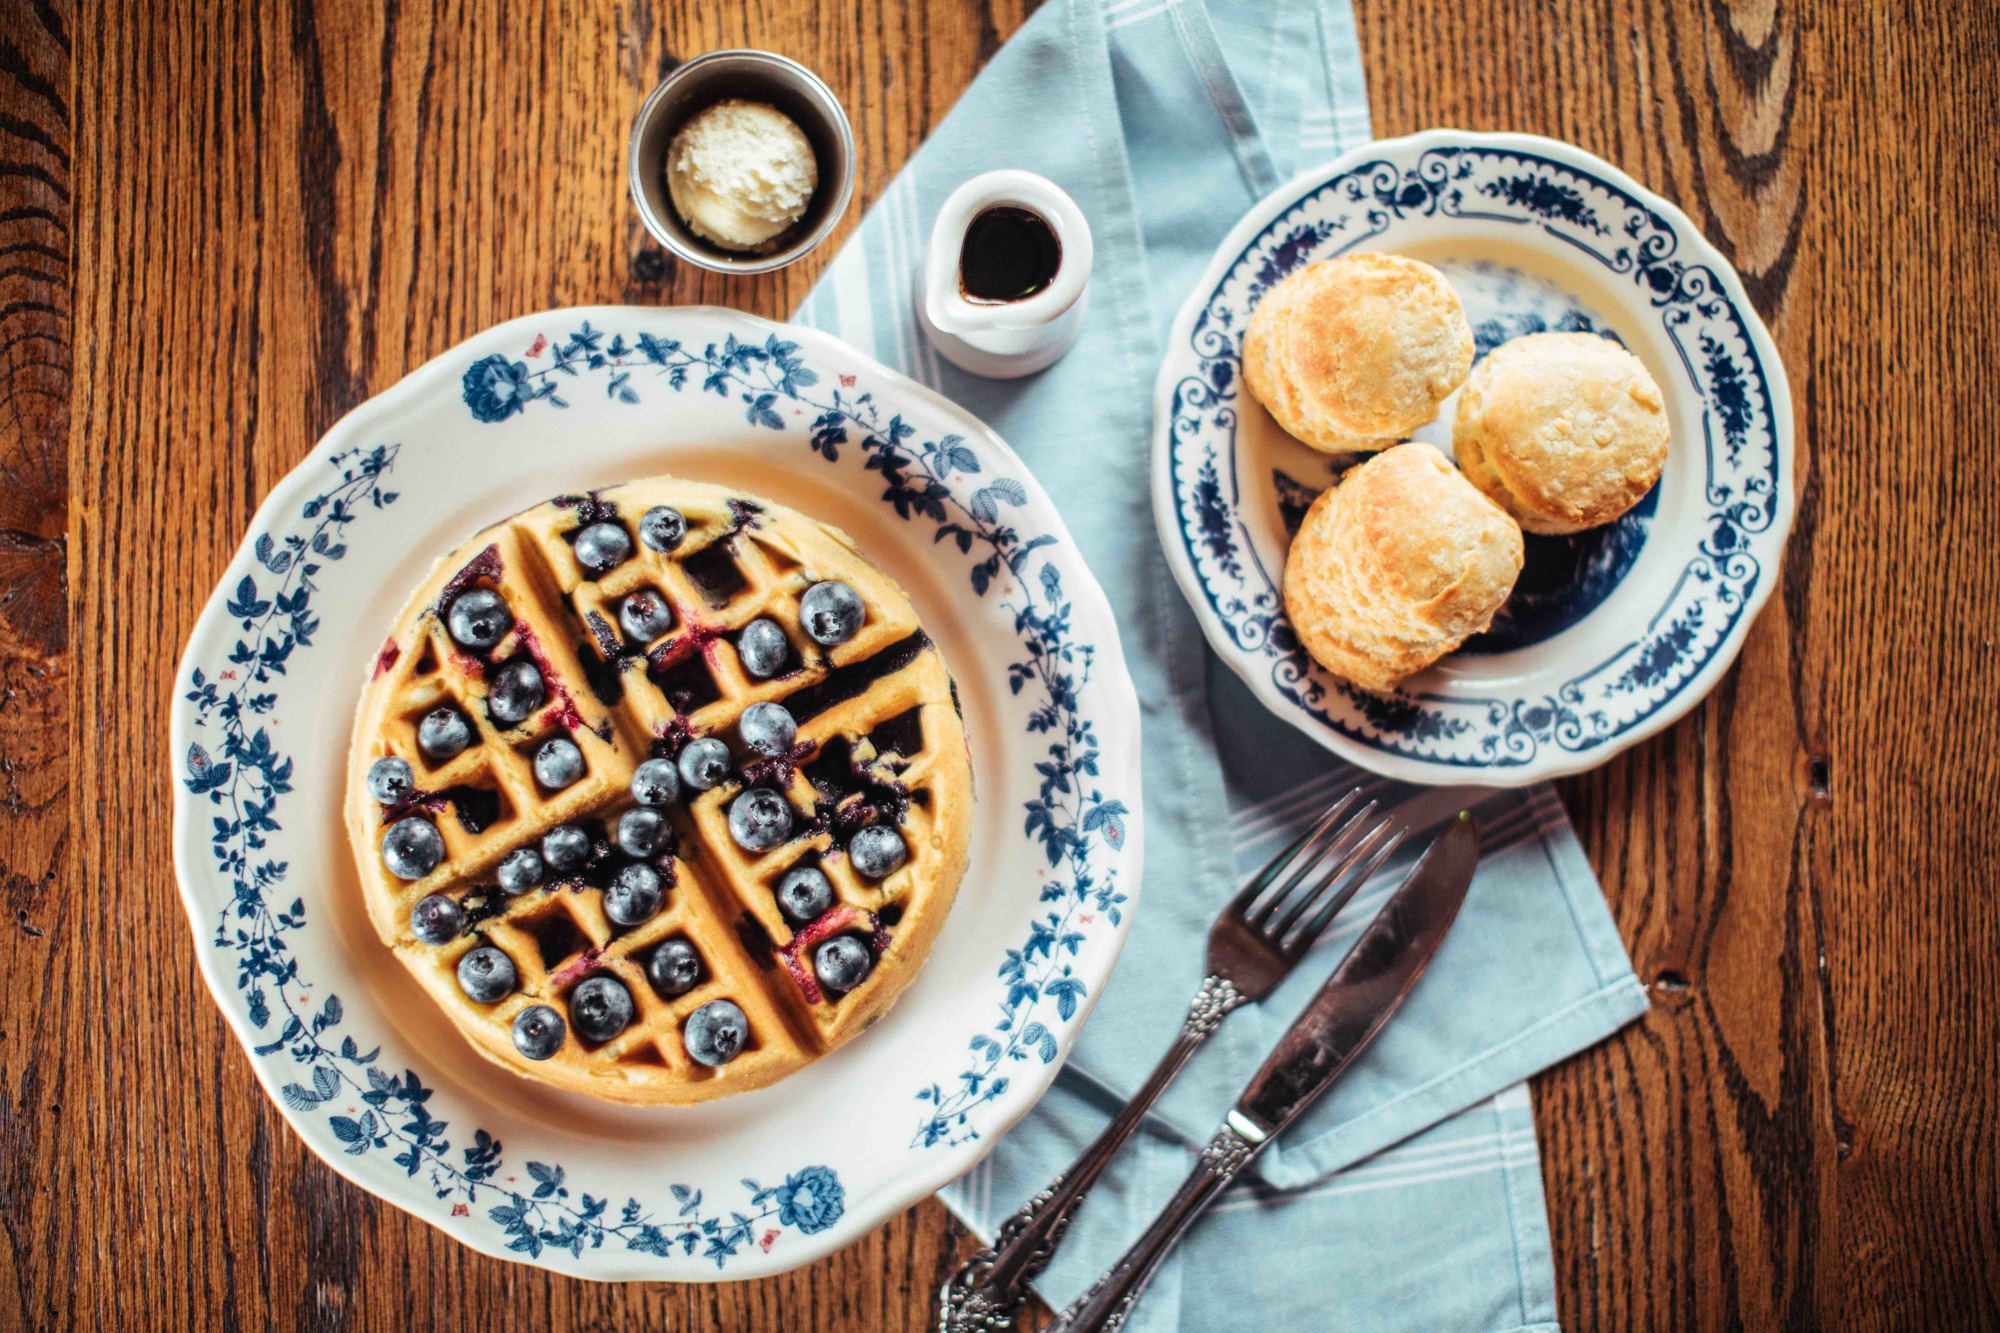 The blueberry waffle at Ida Claire